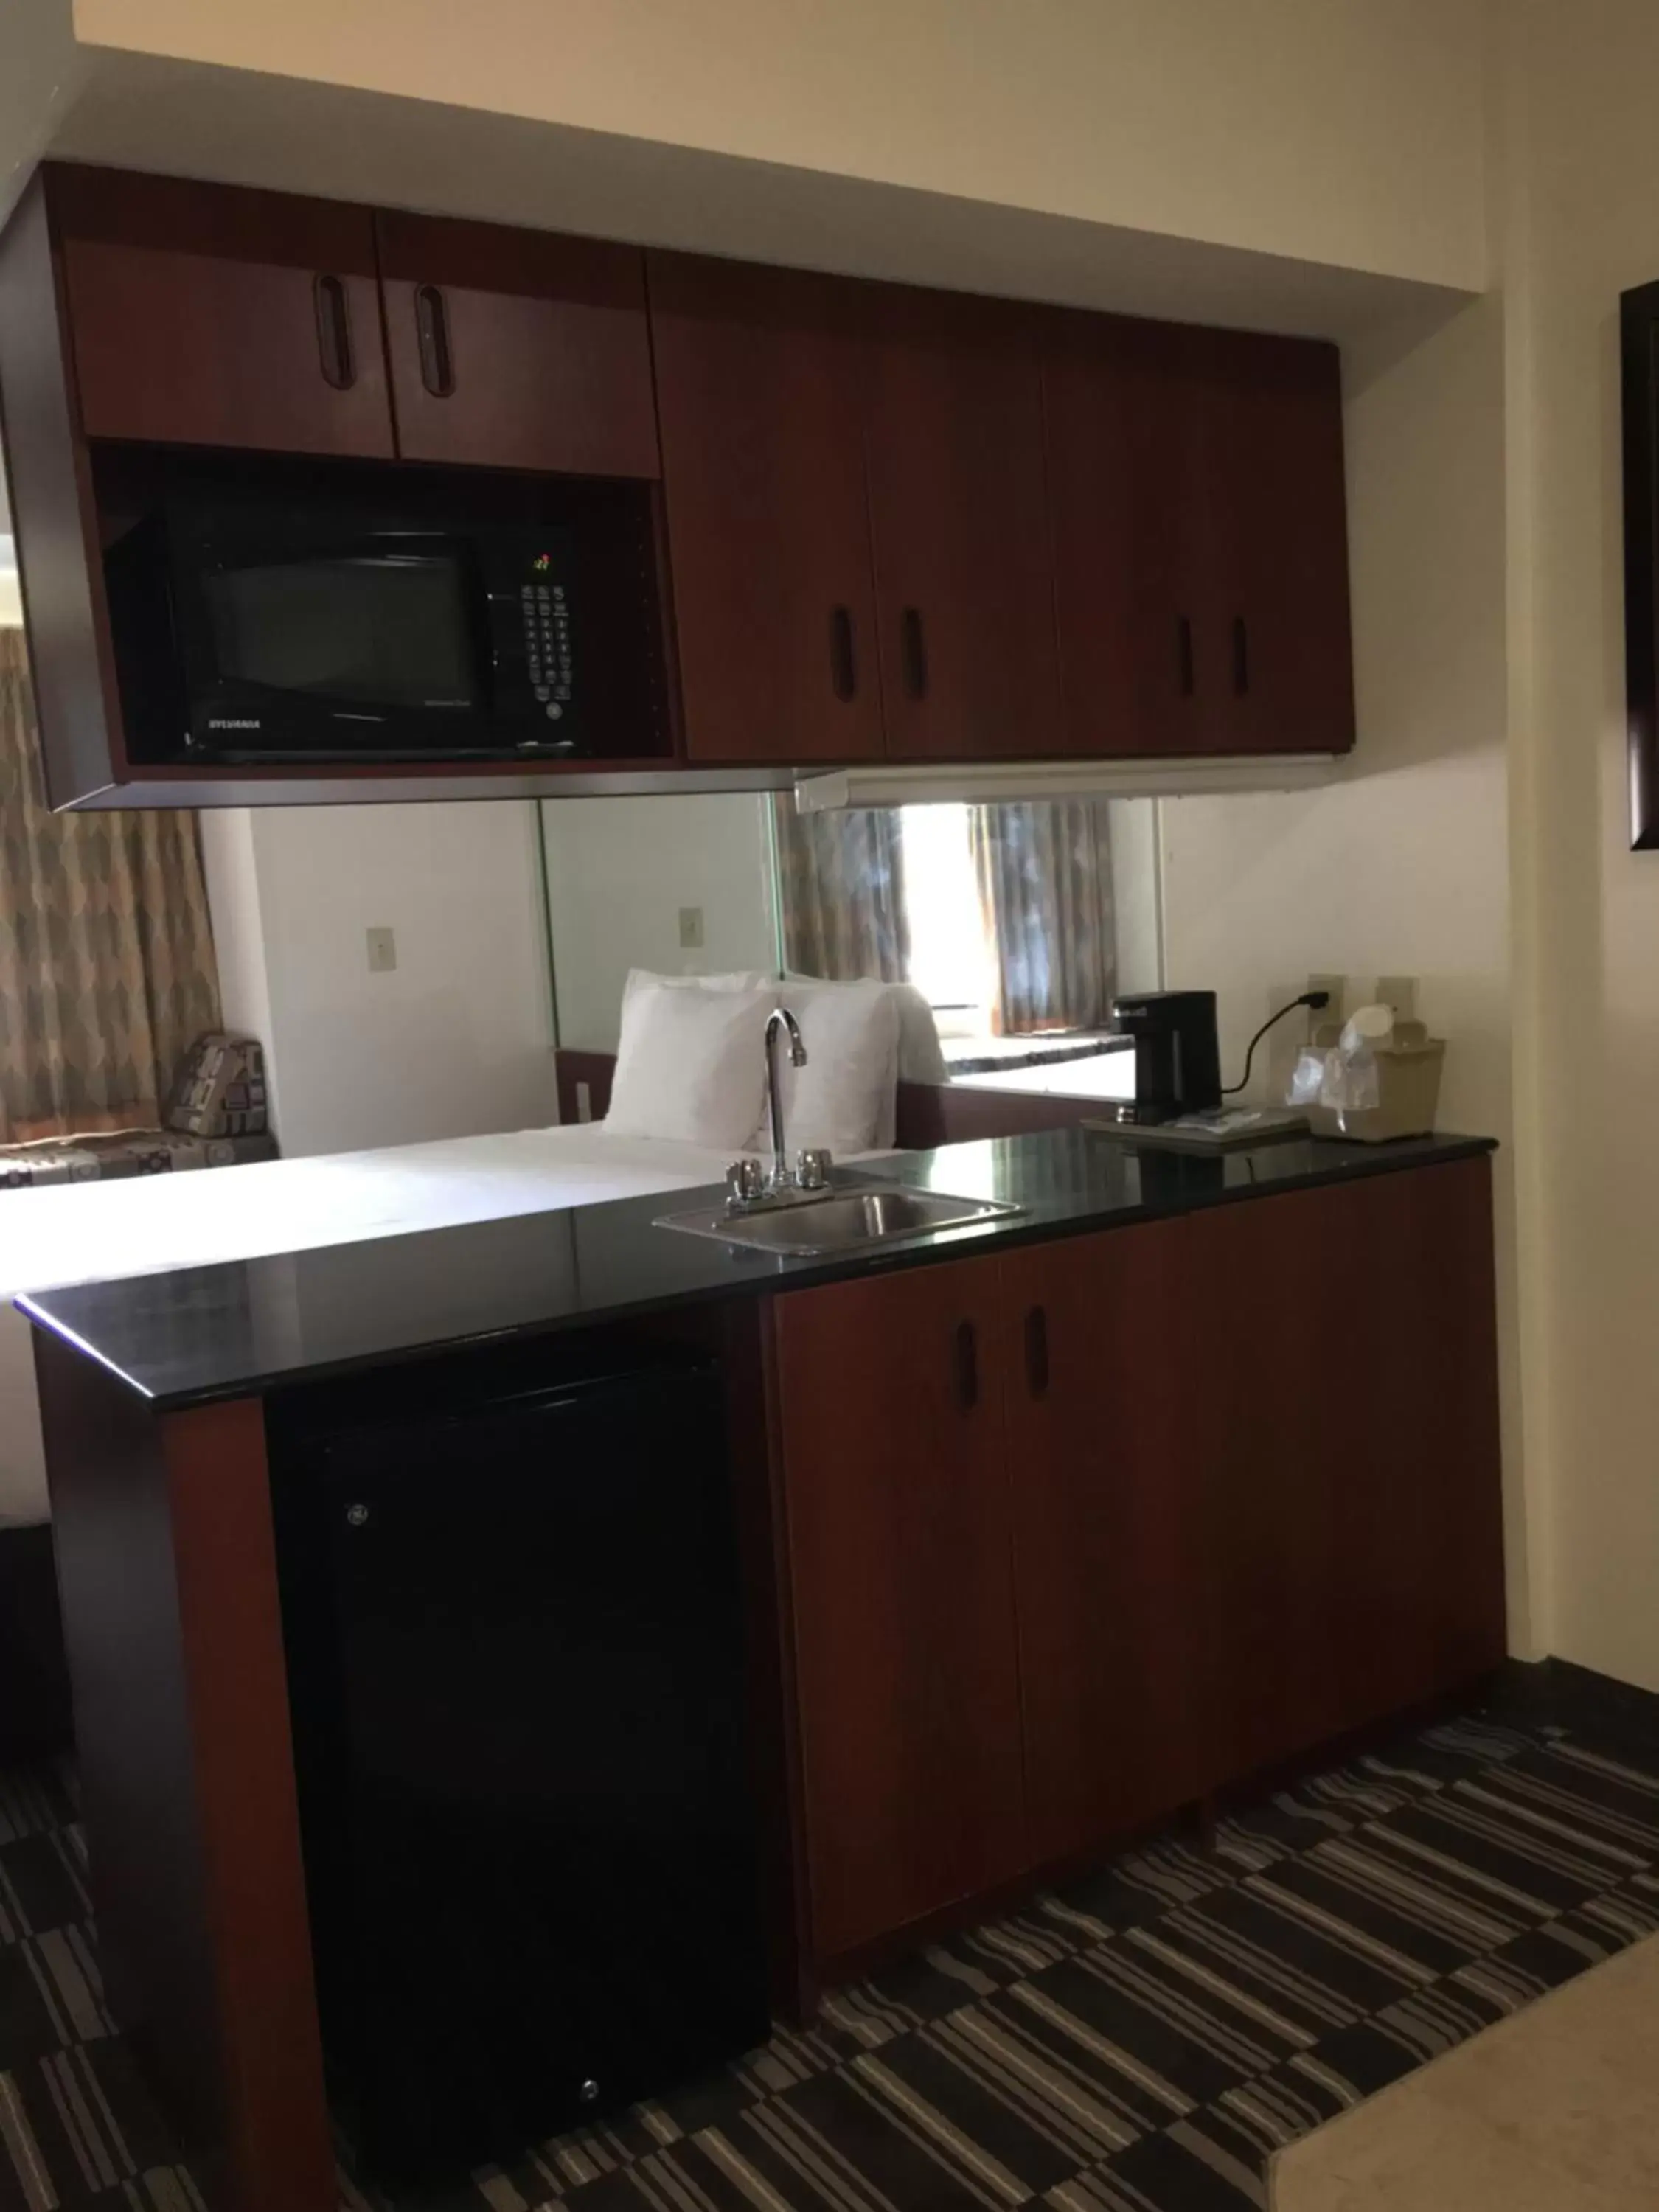 Deluxe Queen Suite - Non-Smoking in Microtel Inn & Suites by Wyndham Indianapolis Airport